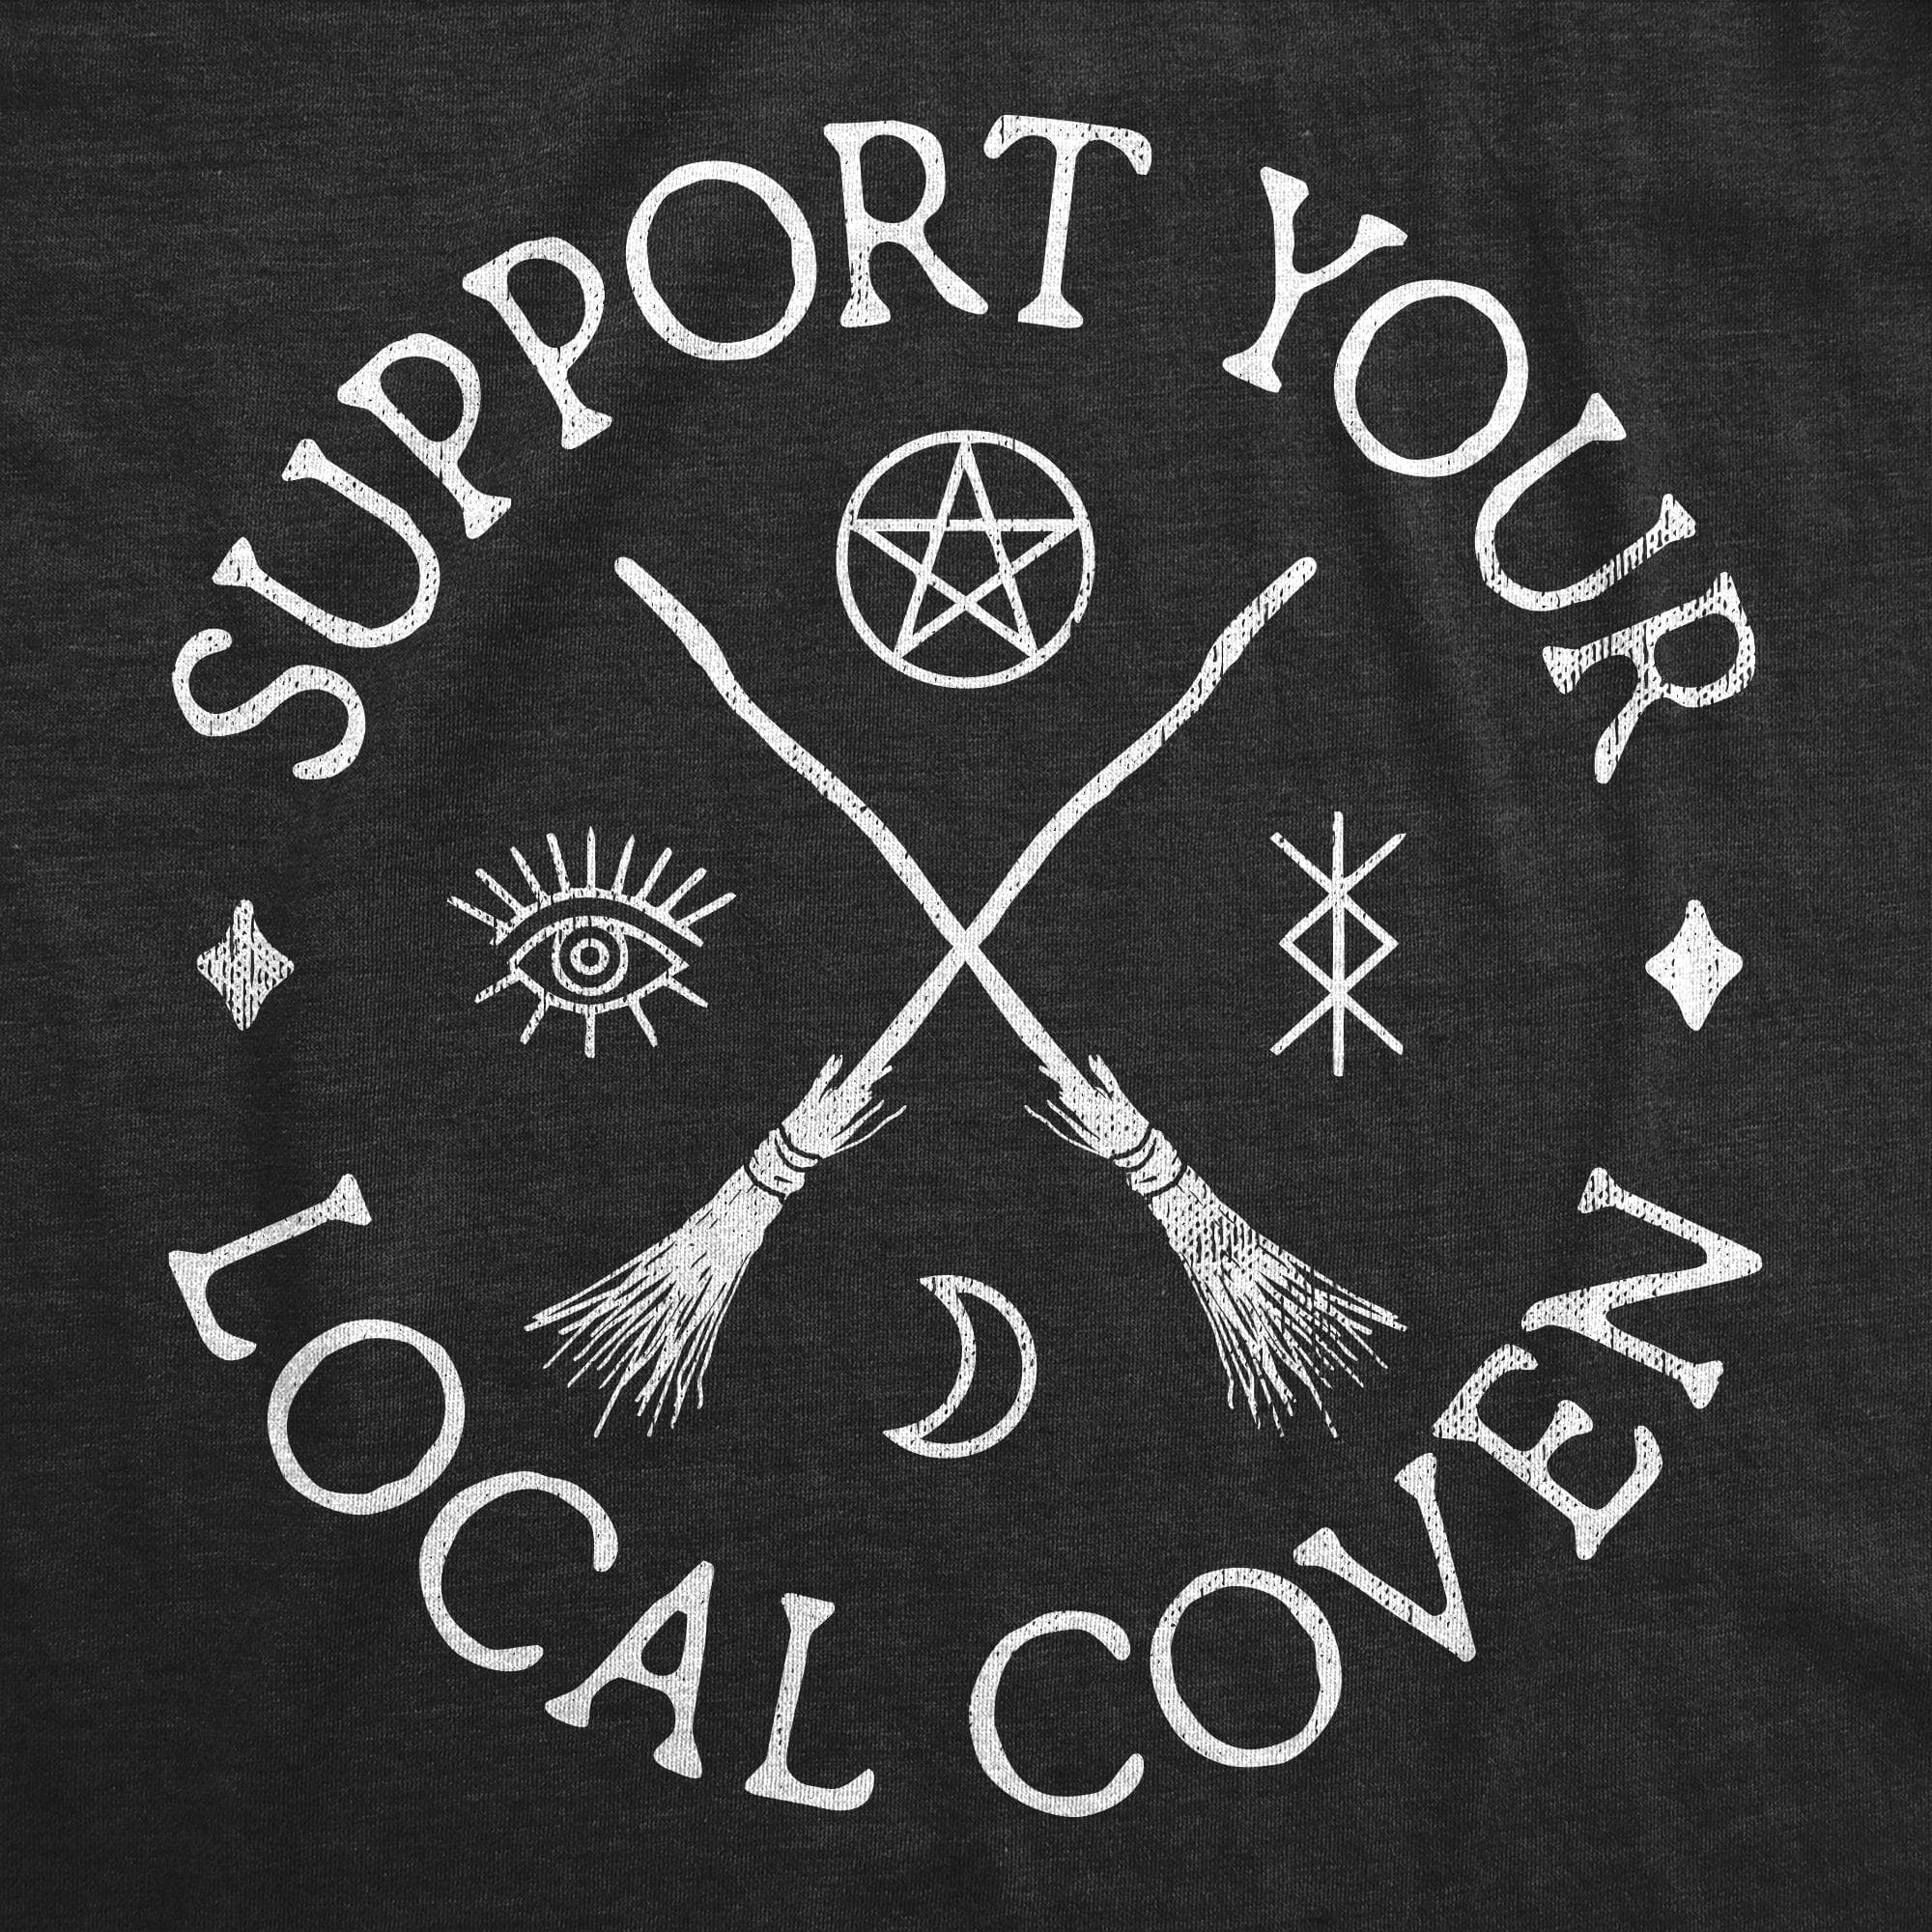 Support Your Local Coven Women's Tshirt  -  Crazy Dog T-Shirts